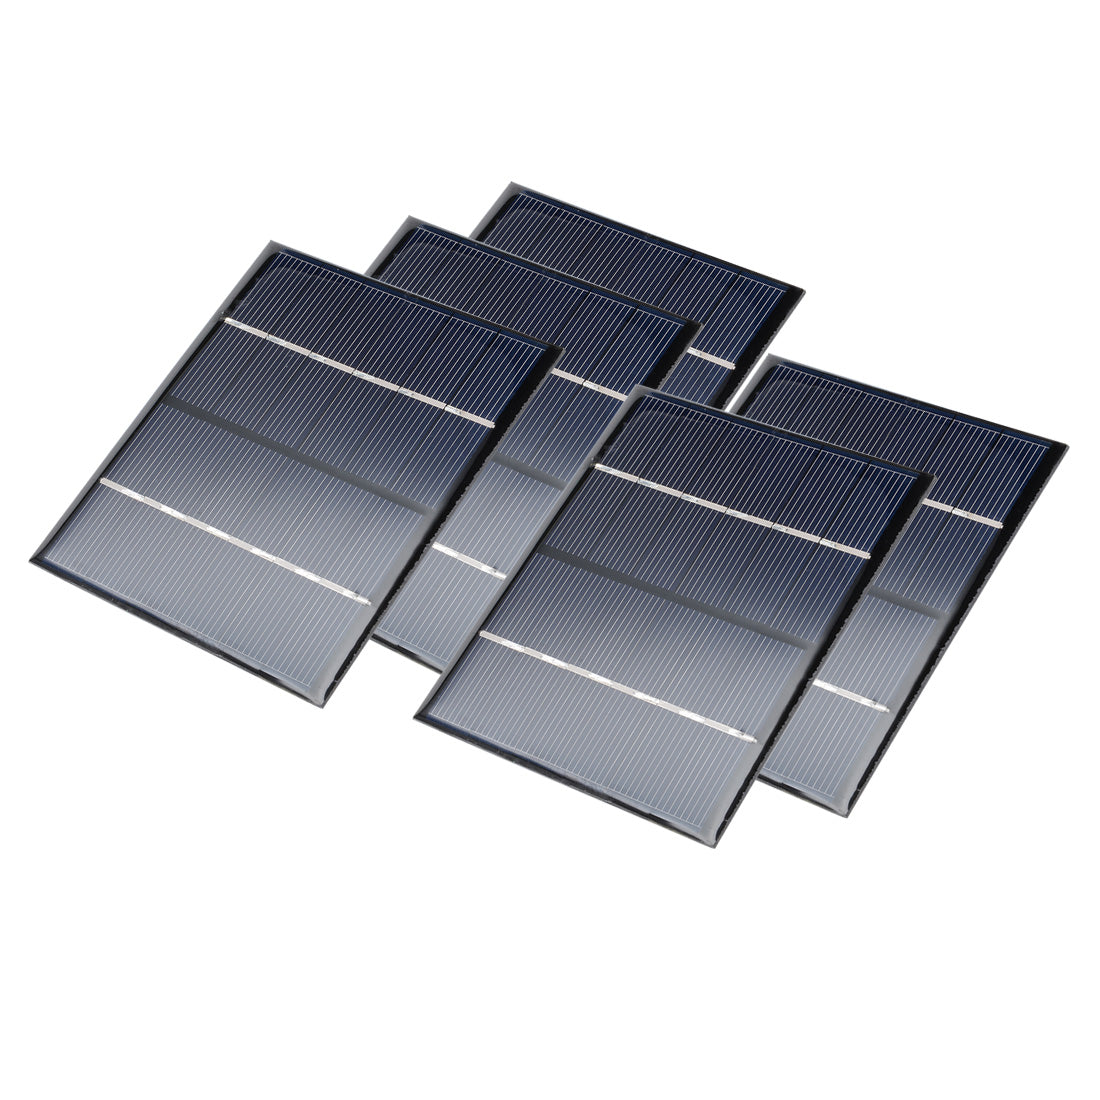 uxcell Uxcell 5Pcs 6V 200mA Poly Mini Solar Cell Panel Module DIY for Light Toys Charger 110mm x 92mm